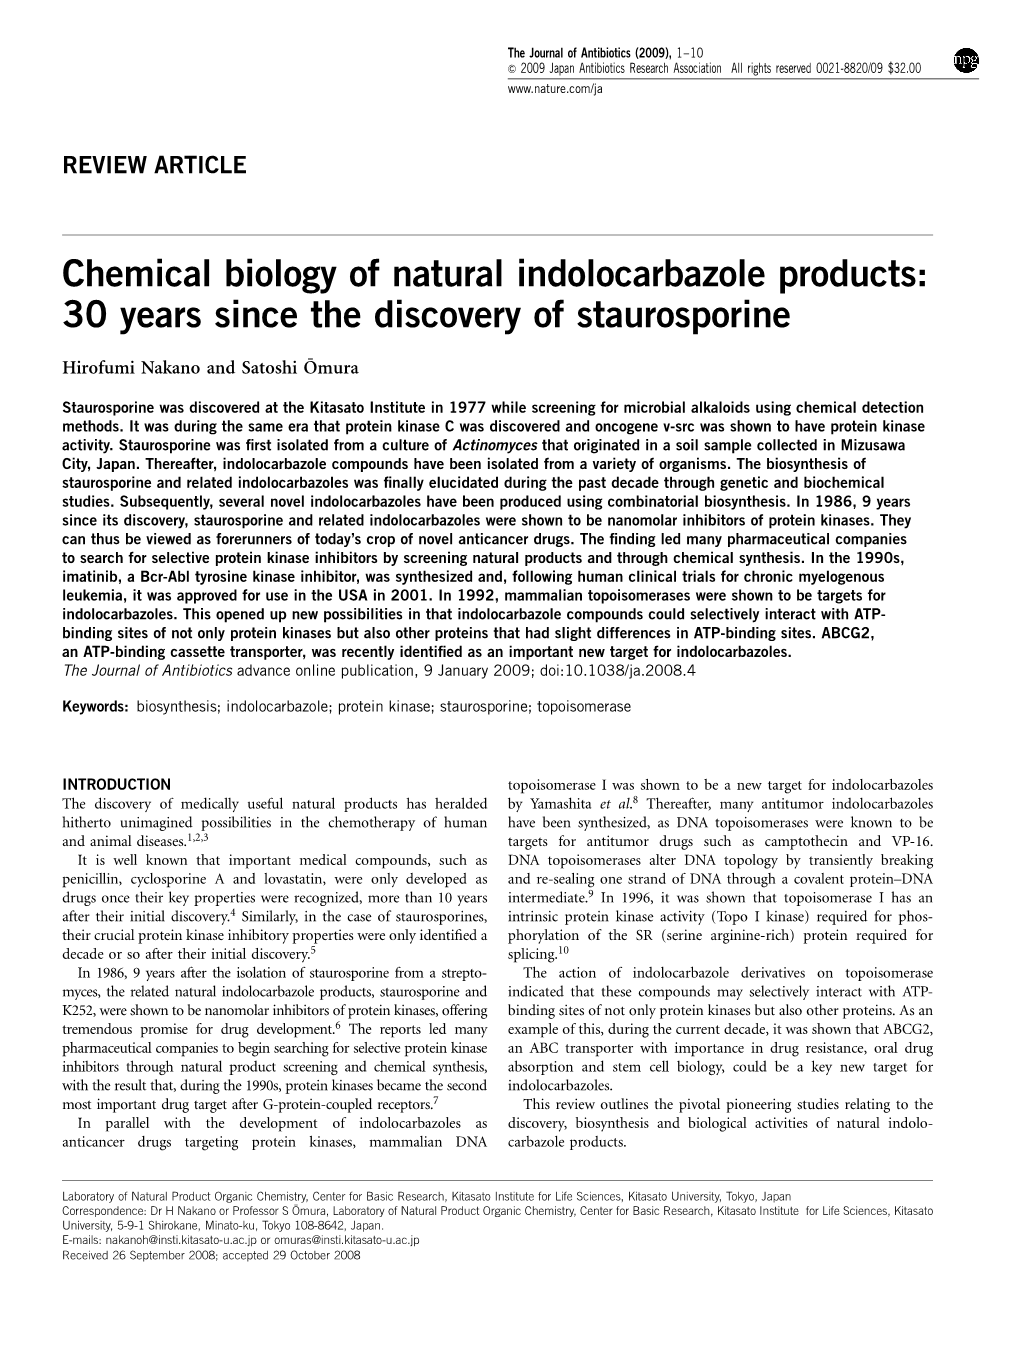 Chemical Biology of Natural Indolocarbazole Products: 30 Years Since the Discovery of Staurosporine